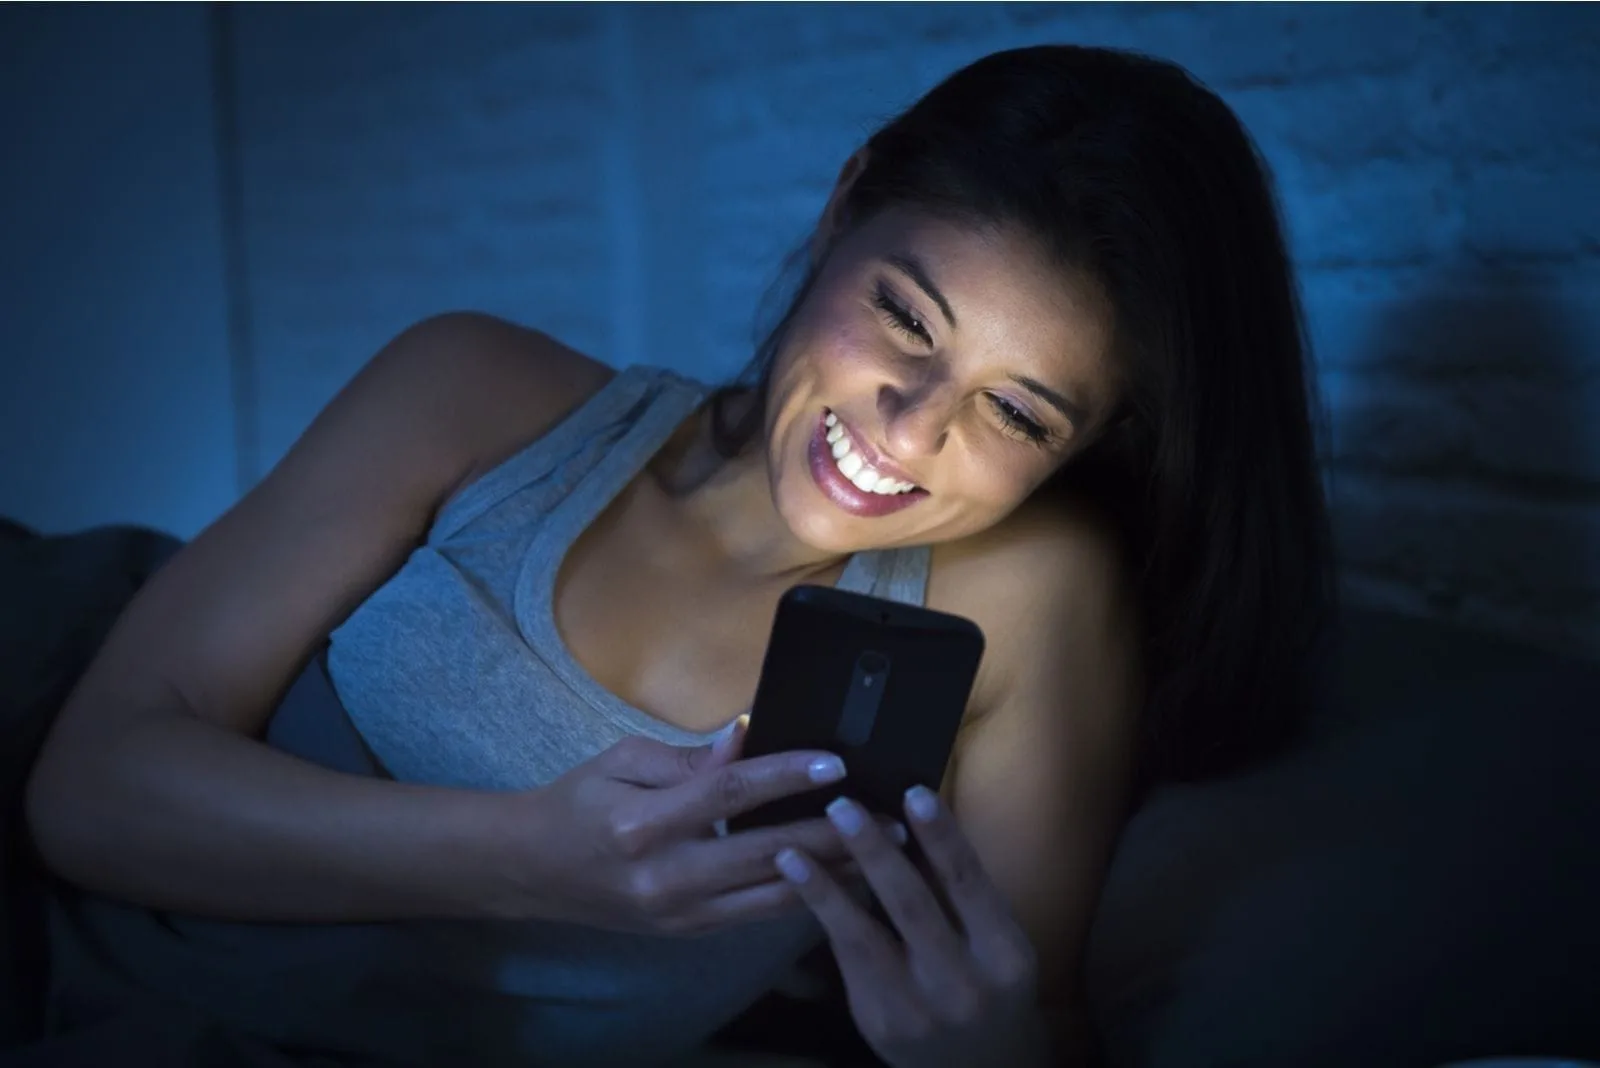 woman in tank top smiling while looking at her smartphone in bed with lights off